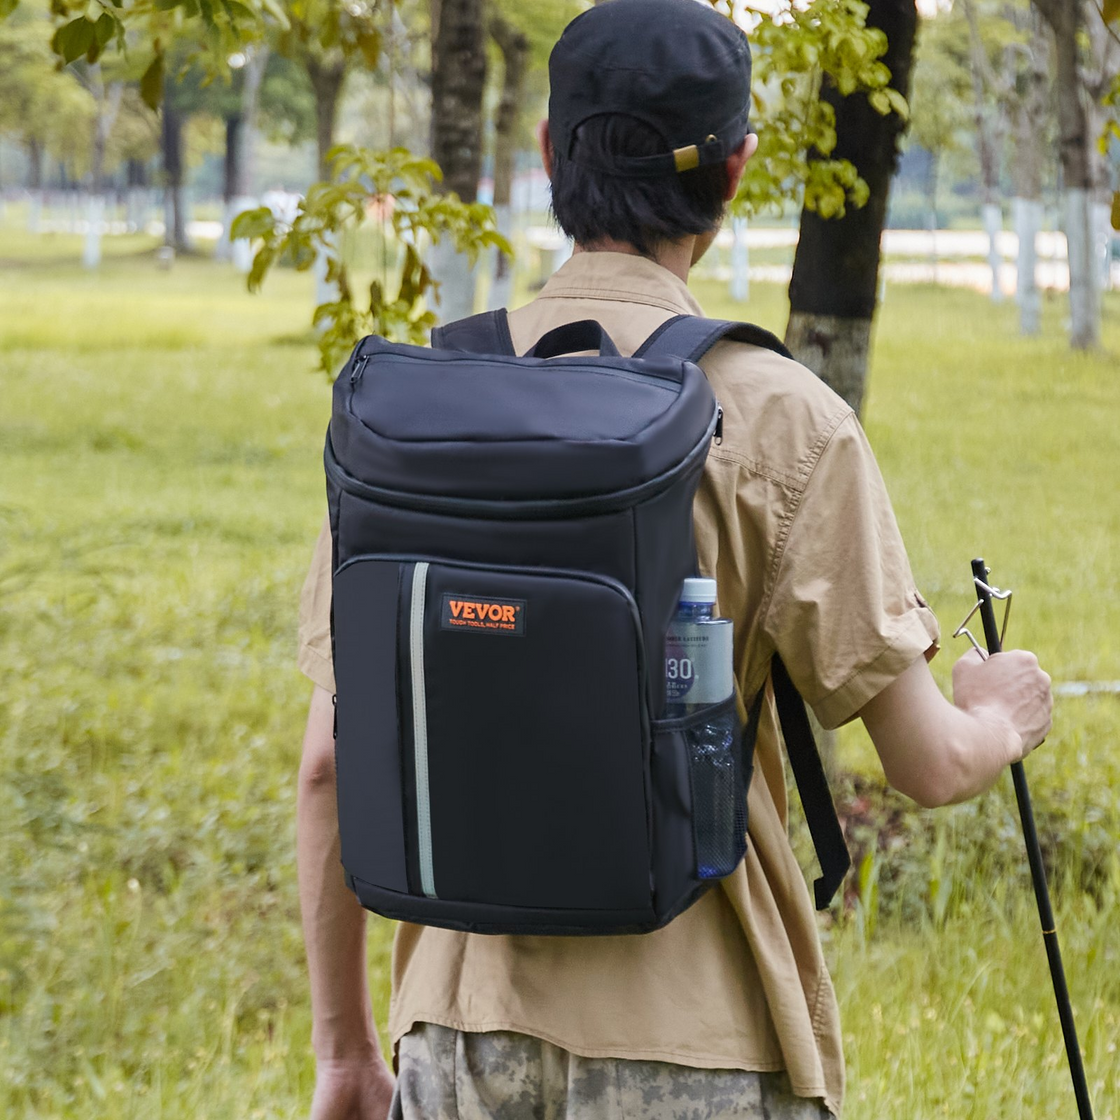 VEVOR Cooler Backpack - Leakproof, Waterproof, and Insulated for Hiking, Camping, BBQ, and More